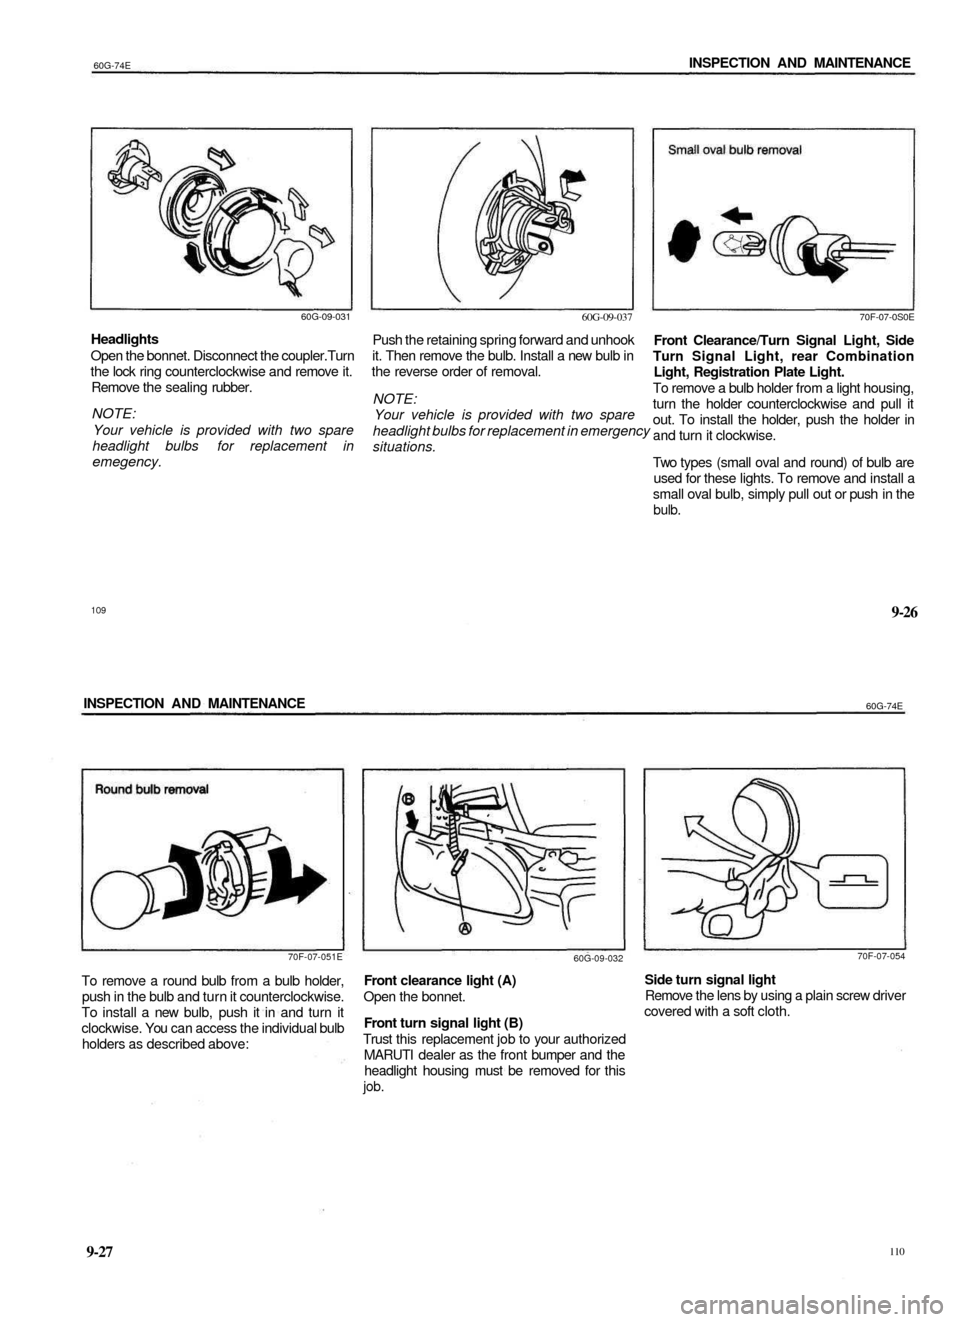 SUZUKI BALENO 1999 1.G Owners Manual 
60G-74E 
INSPECTION AND MAINTENANCE

60G-09-031

Headlights

Open the bonnet. Disconnect the coupler.Turn

the lock ring counterclockwise and remove it.

Remove the sealing rubber.

NOTE:

Your vehic